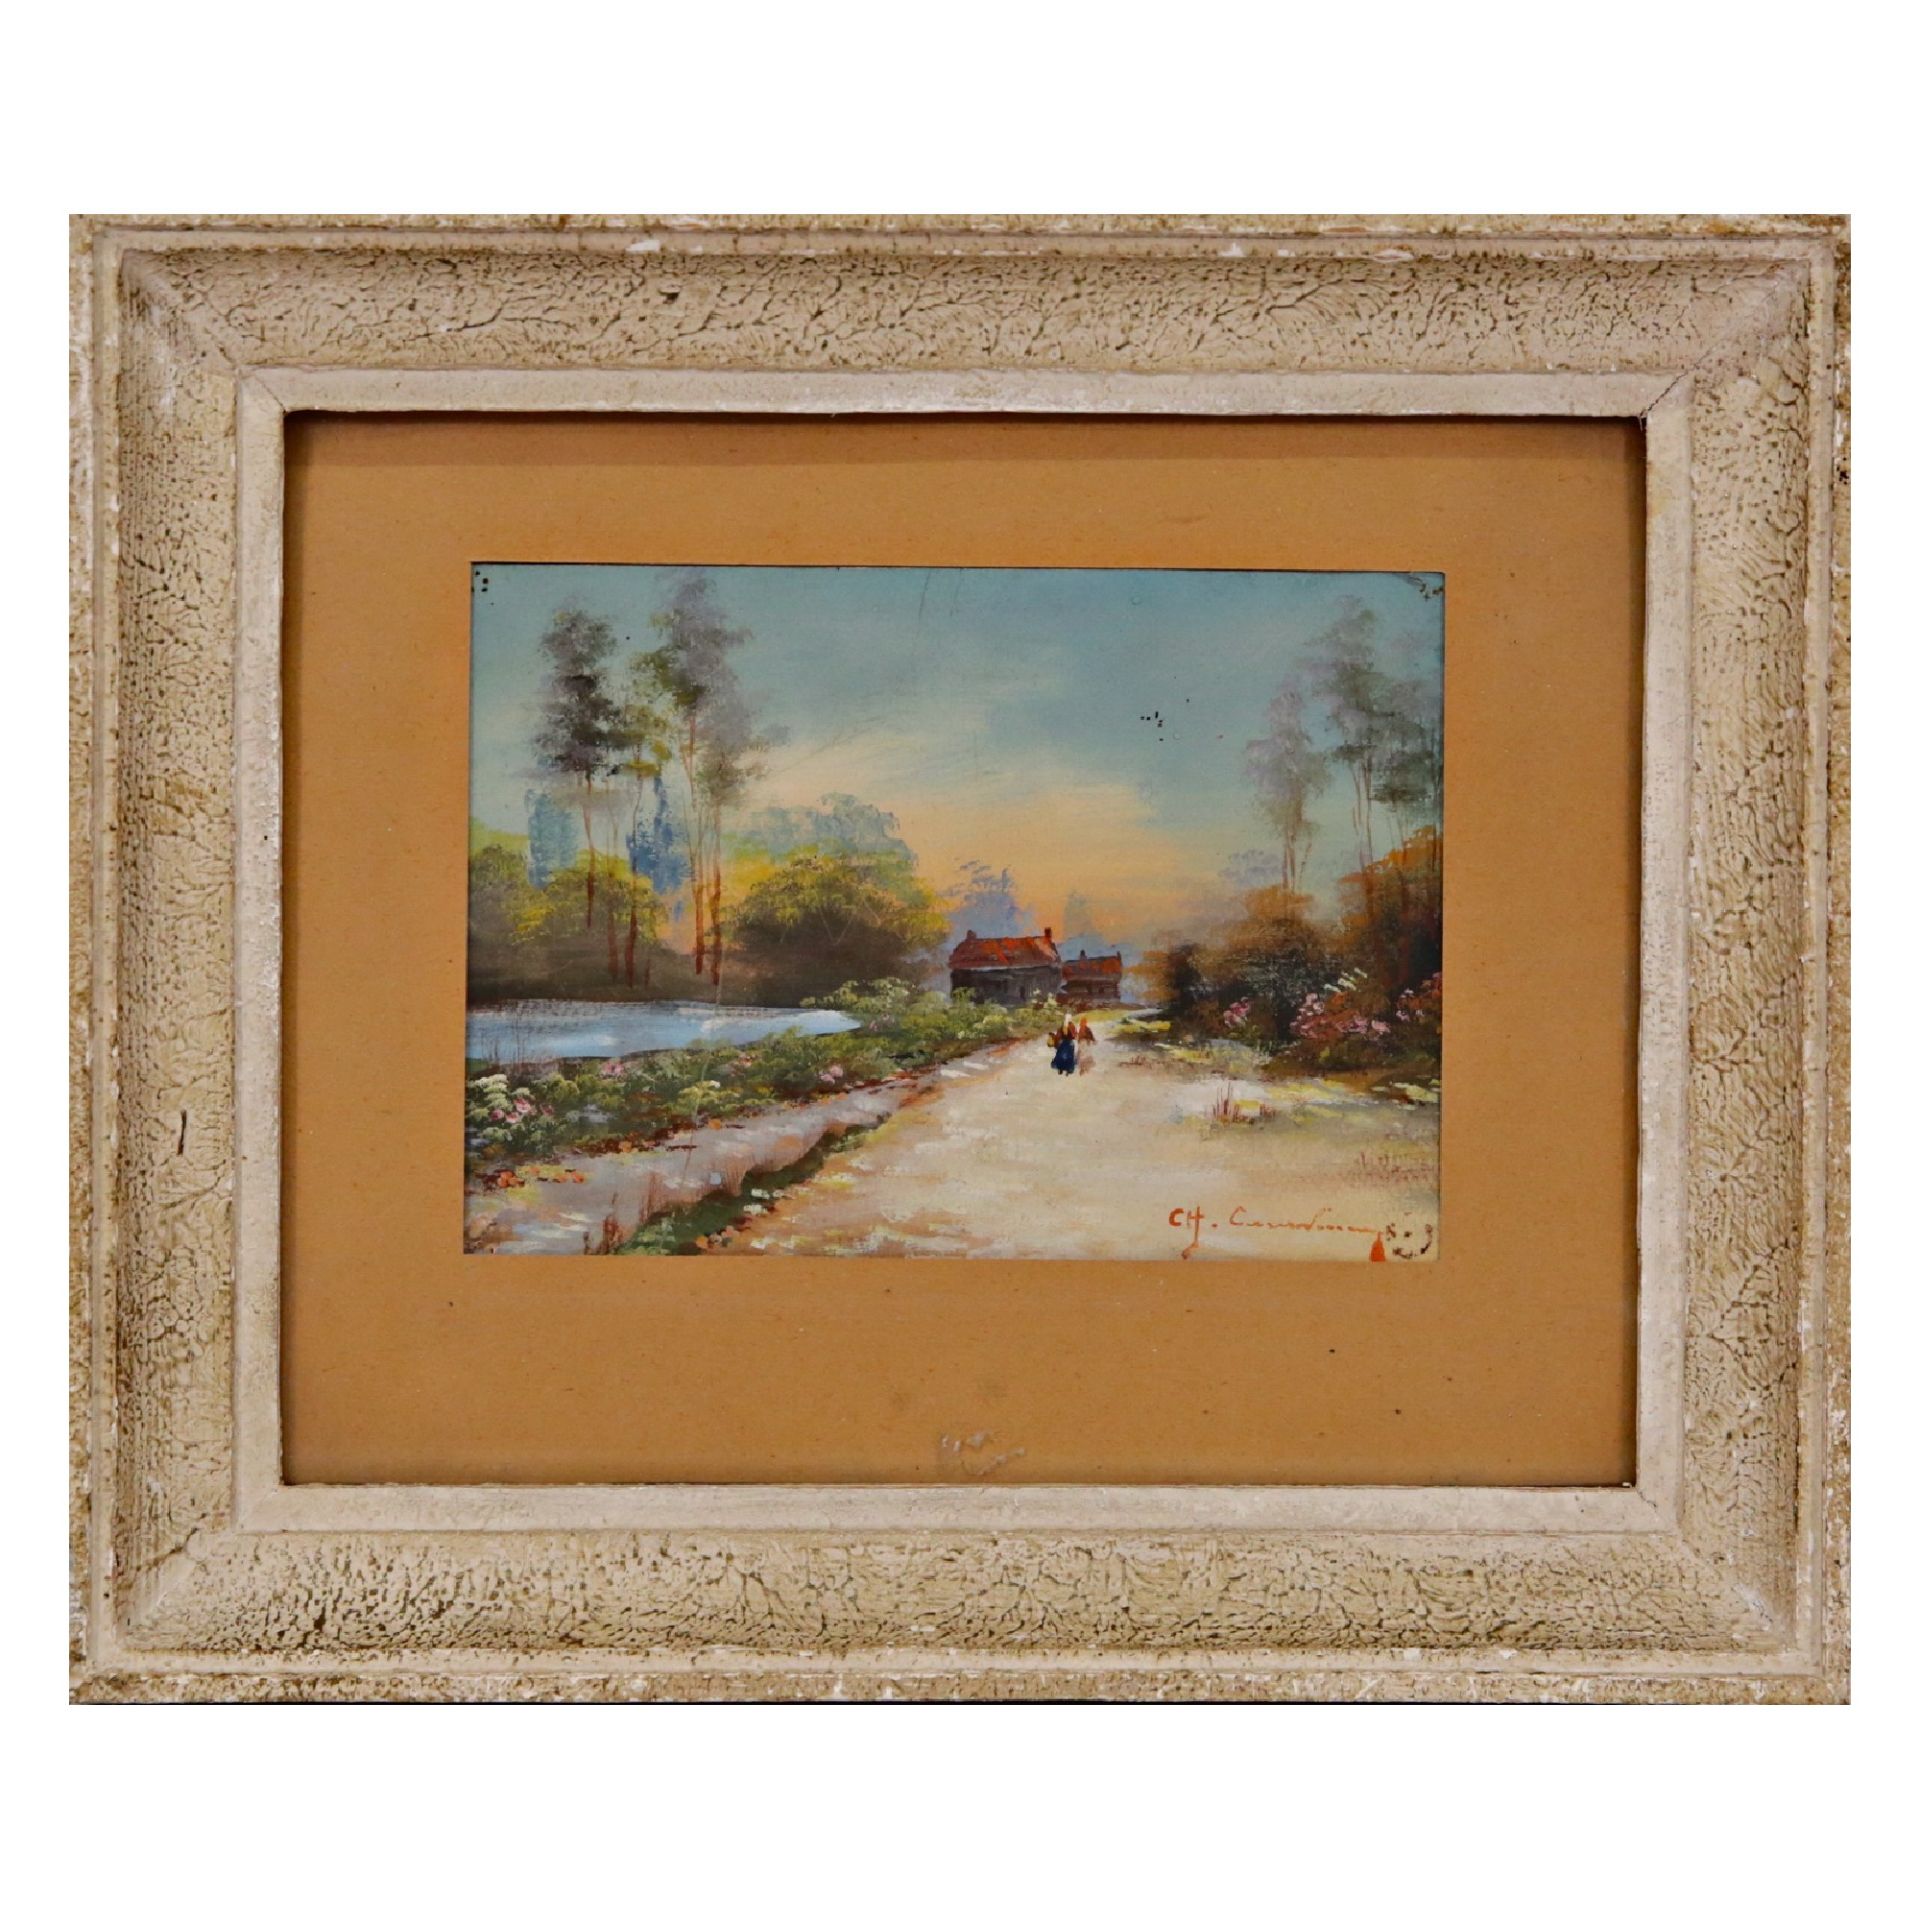 ÒVillage LandscapeÓ, Gouache on paper, signed by the Ch.Contamine, French painting of the 20th _.